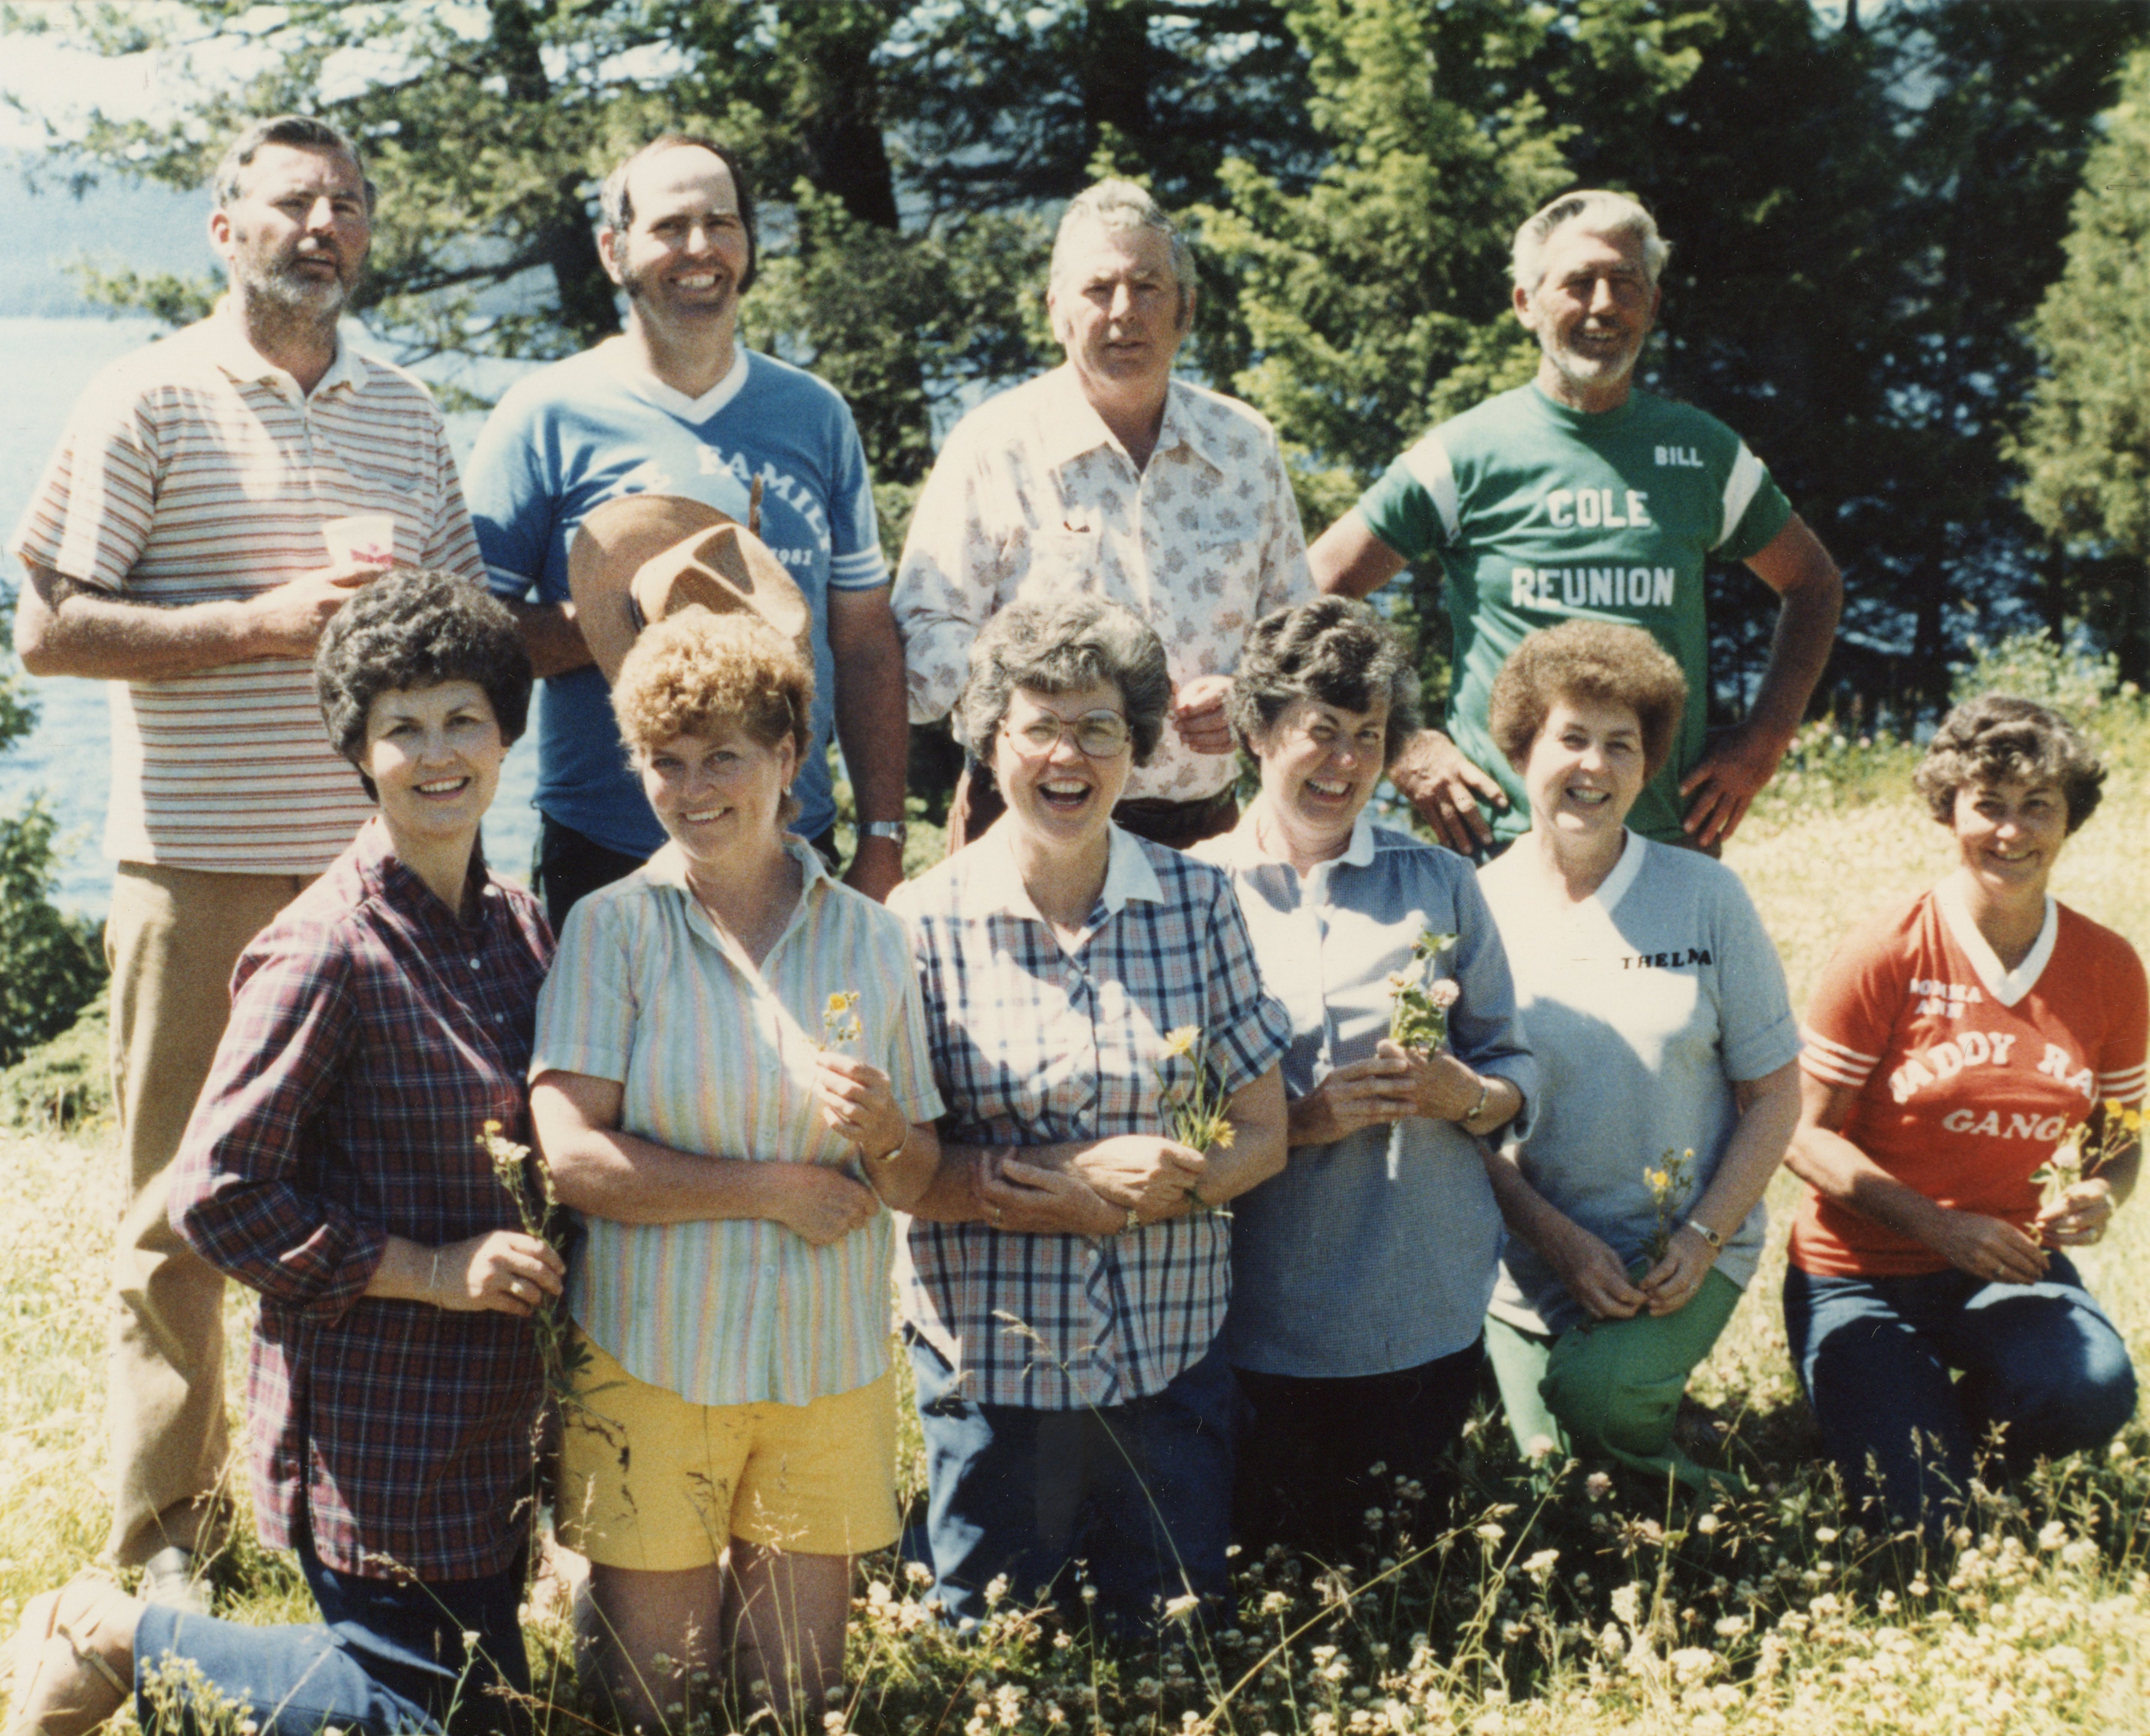 Wilford and Marie Cole children, back row:  Tom, Jim, Dick and Bill Cole and front row:  Jean Stengem, Lois Waller, Della Pimley, Dorothy Solomon, Thelma McLain, and Ann LaCroix enjoy the 1981 Camp Cole Reunion near Kalispell, Montana.